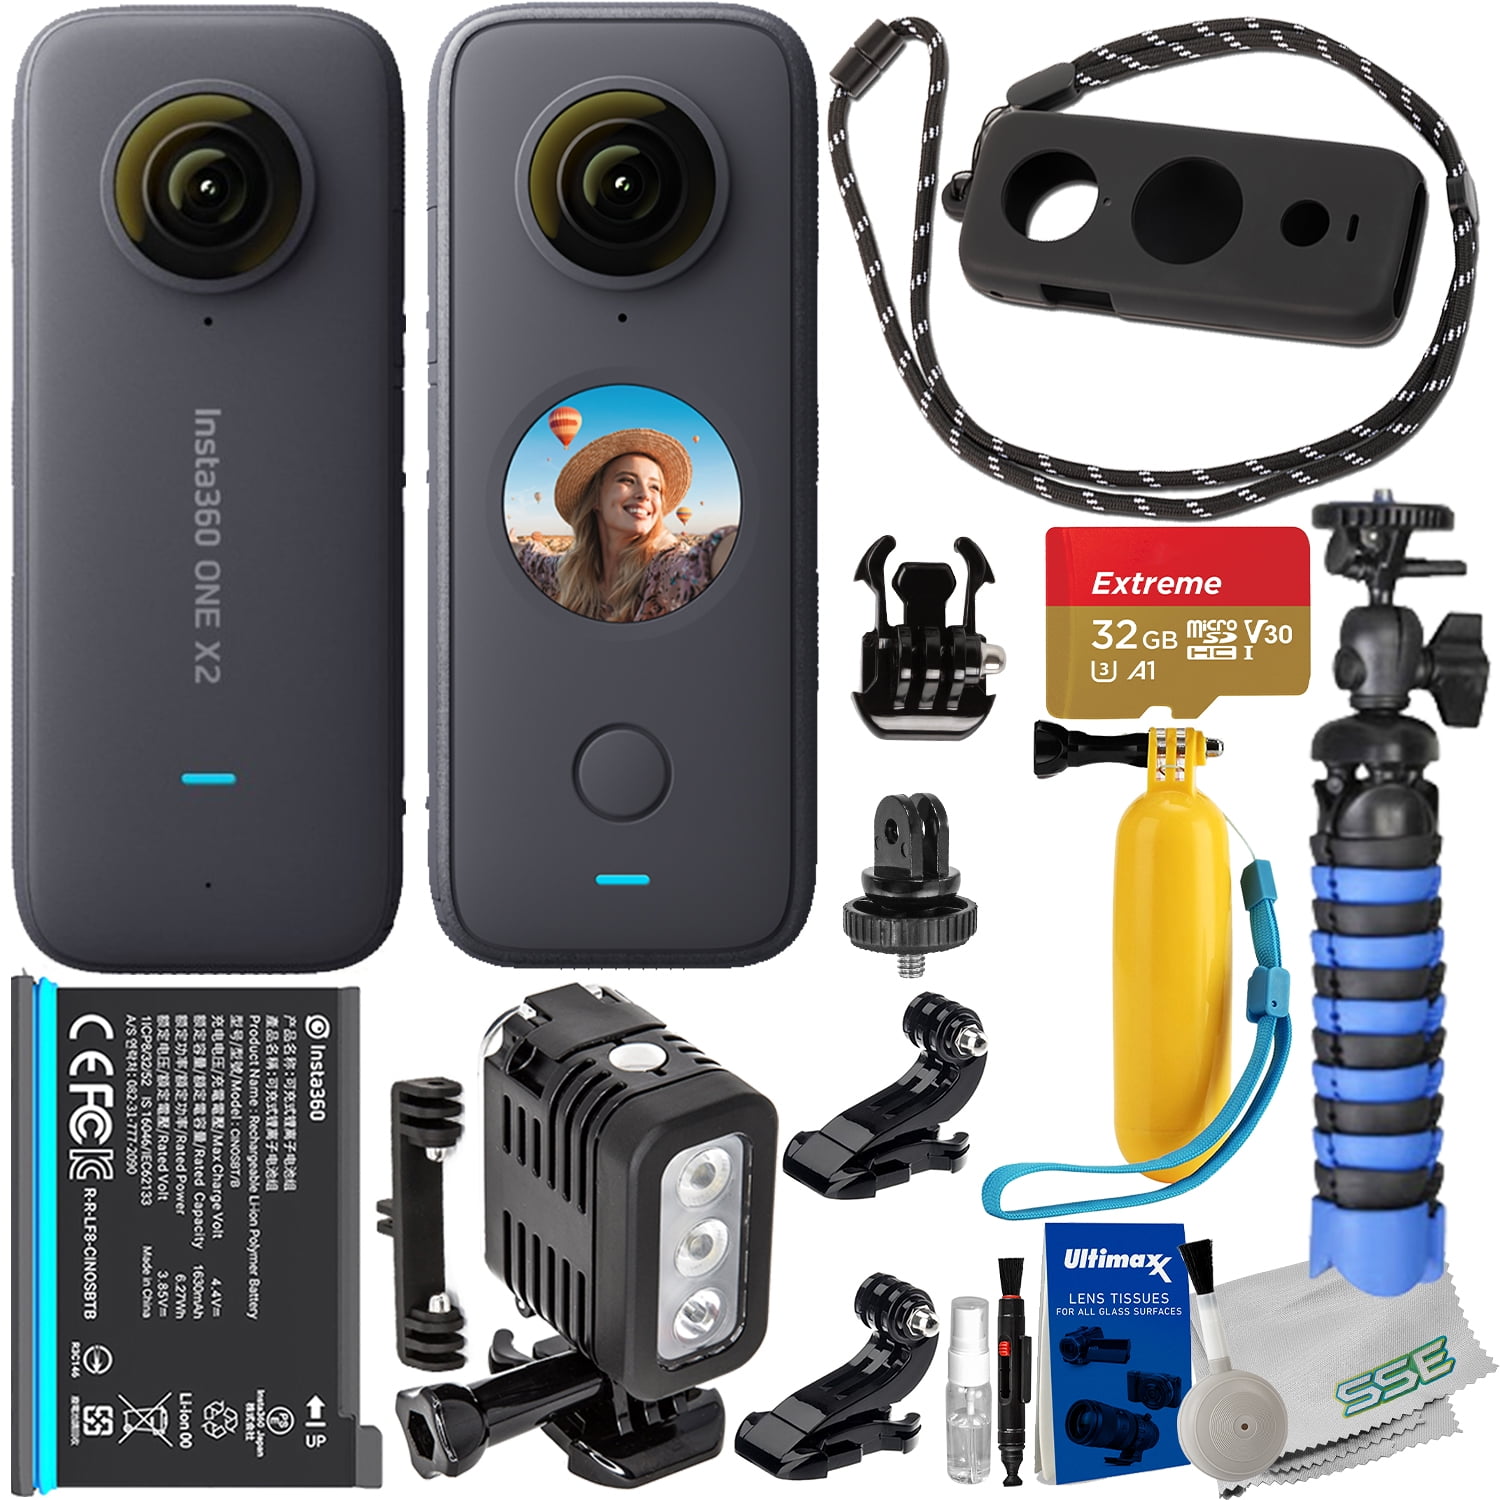 Ultimaxx Advanced Action Insta360 ONE X2 Bundle - Includes: 64GB Extreme  MicroSD Card, Underwater LED Light, & Much More